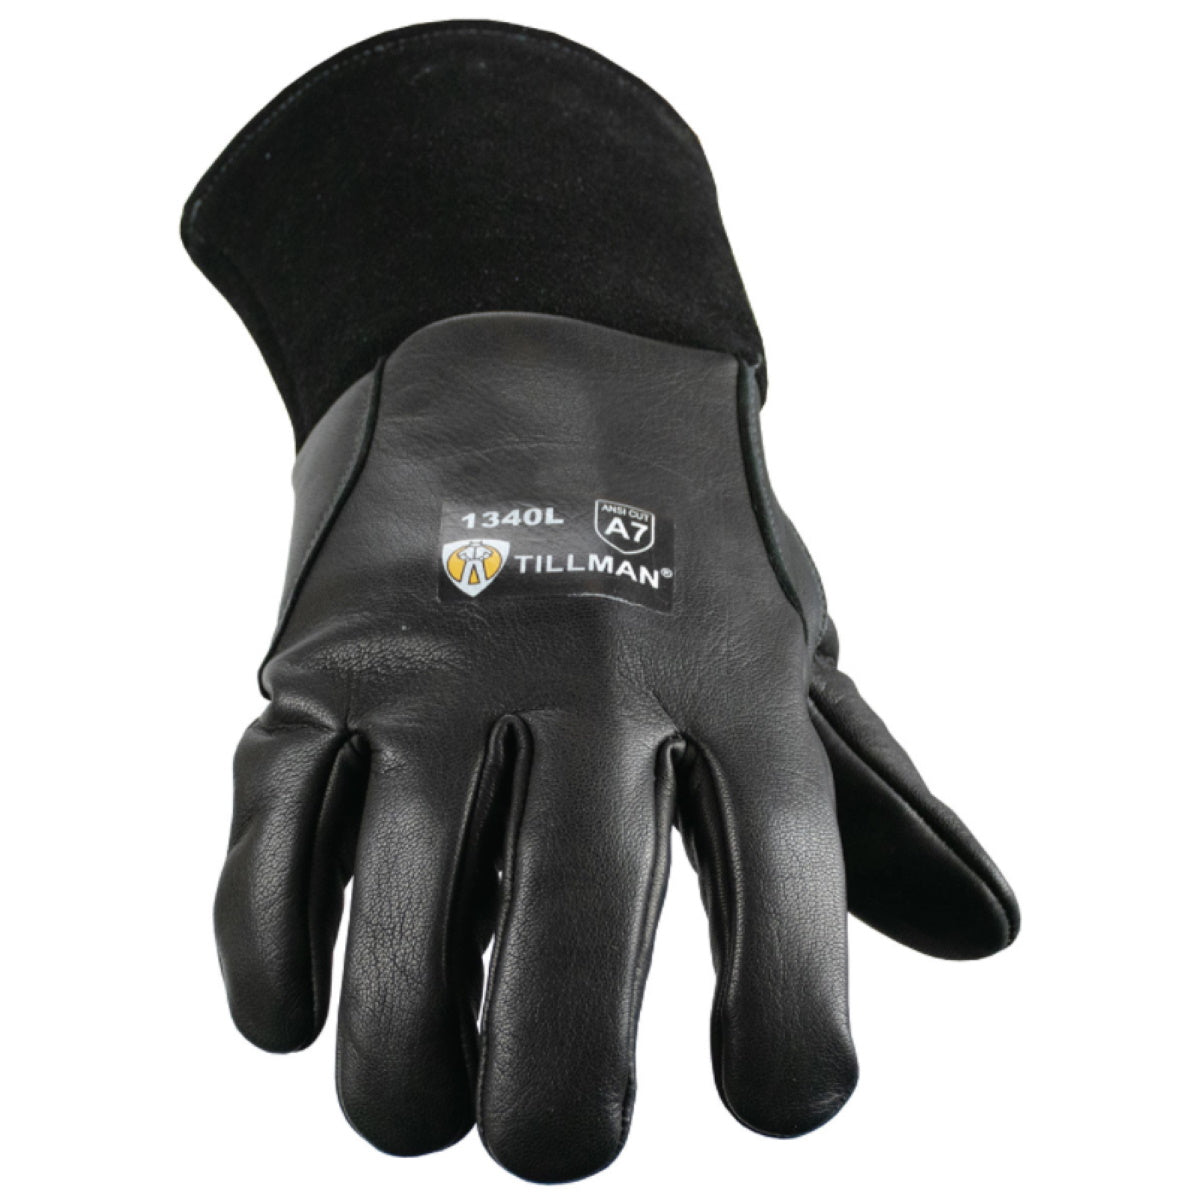 Tillman 1340 MIG Glove with ANSI A7 Cut Resistance and Oil X